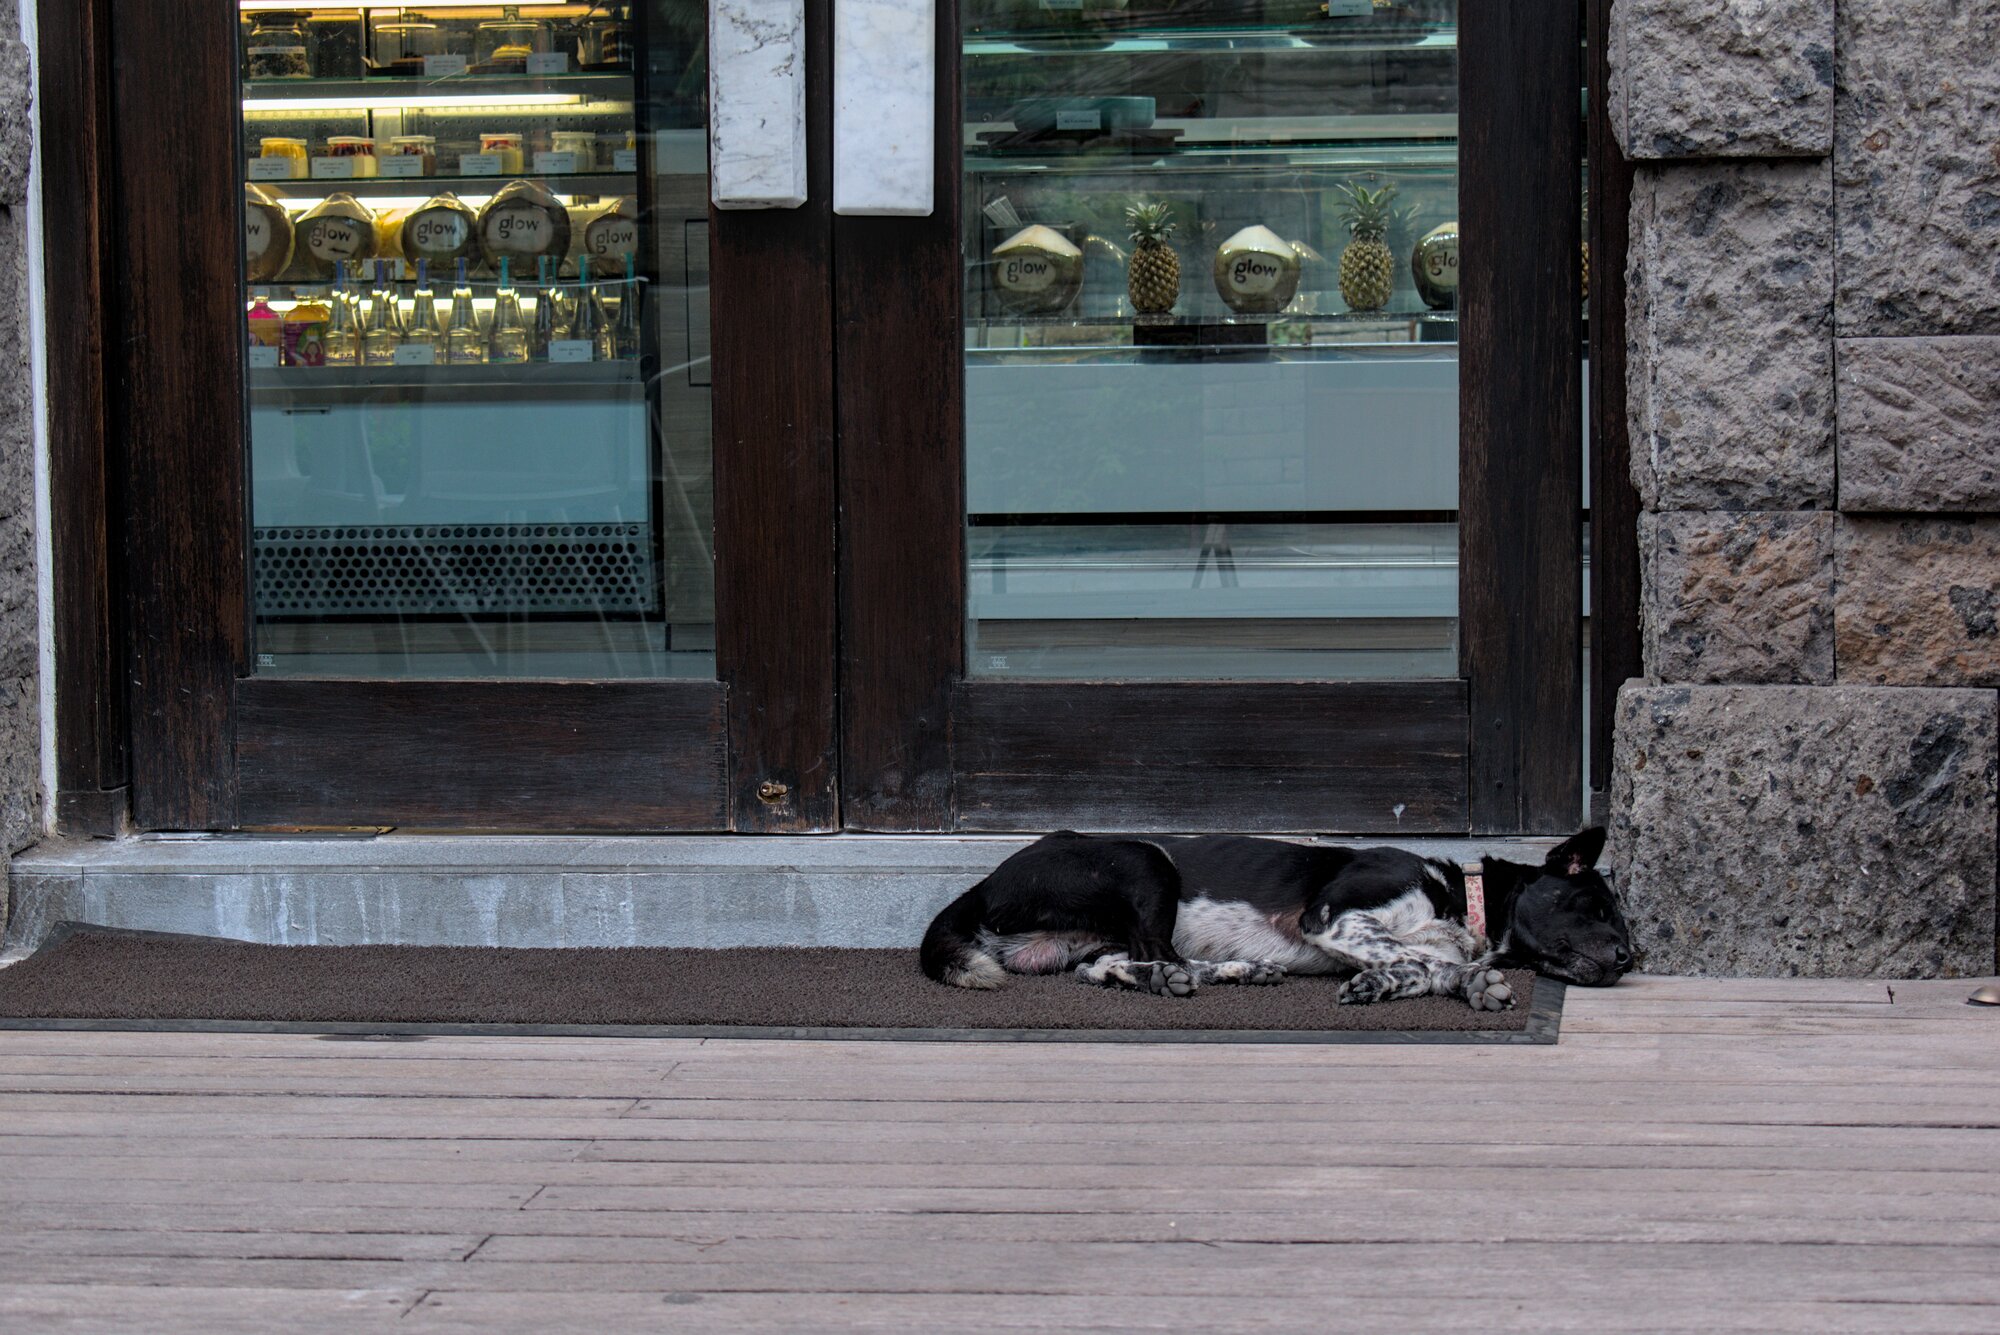 A stray dog sleeping in front of a shop door.